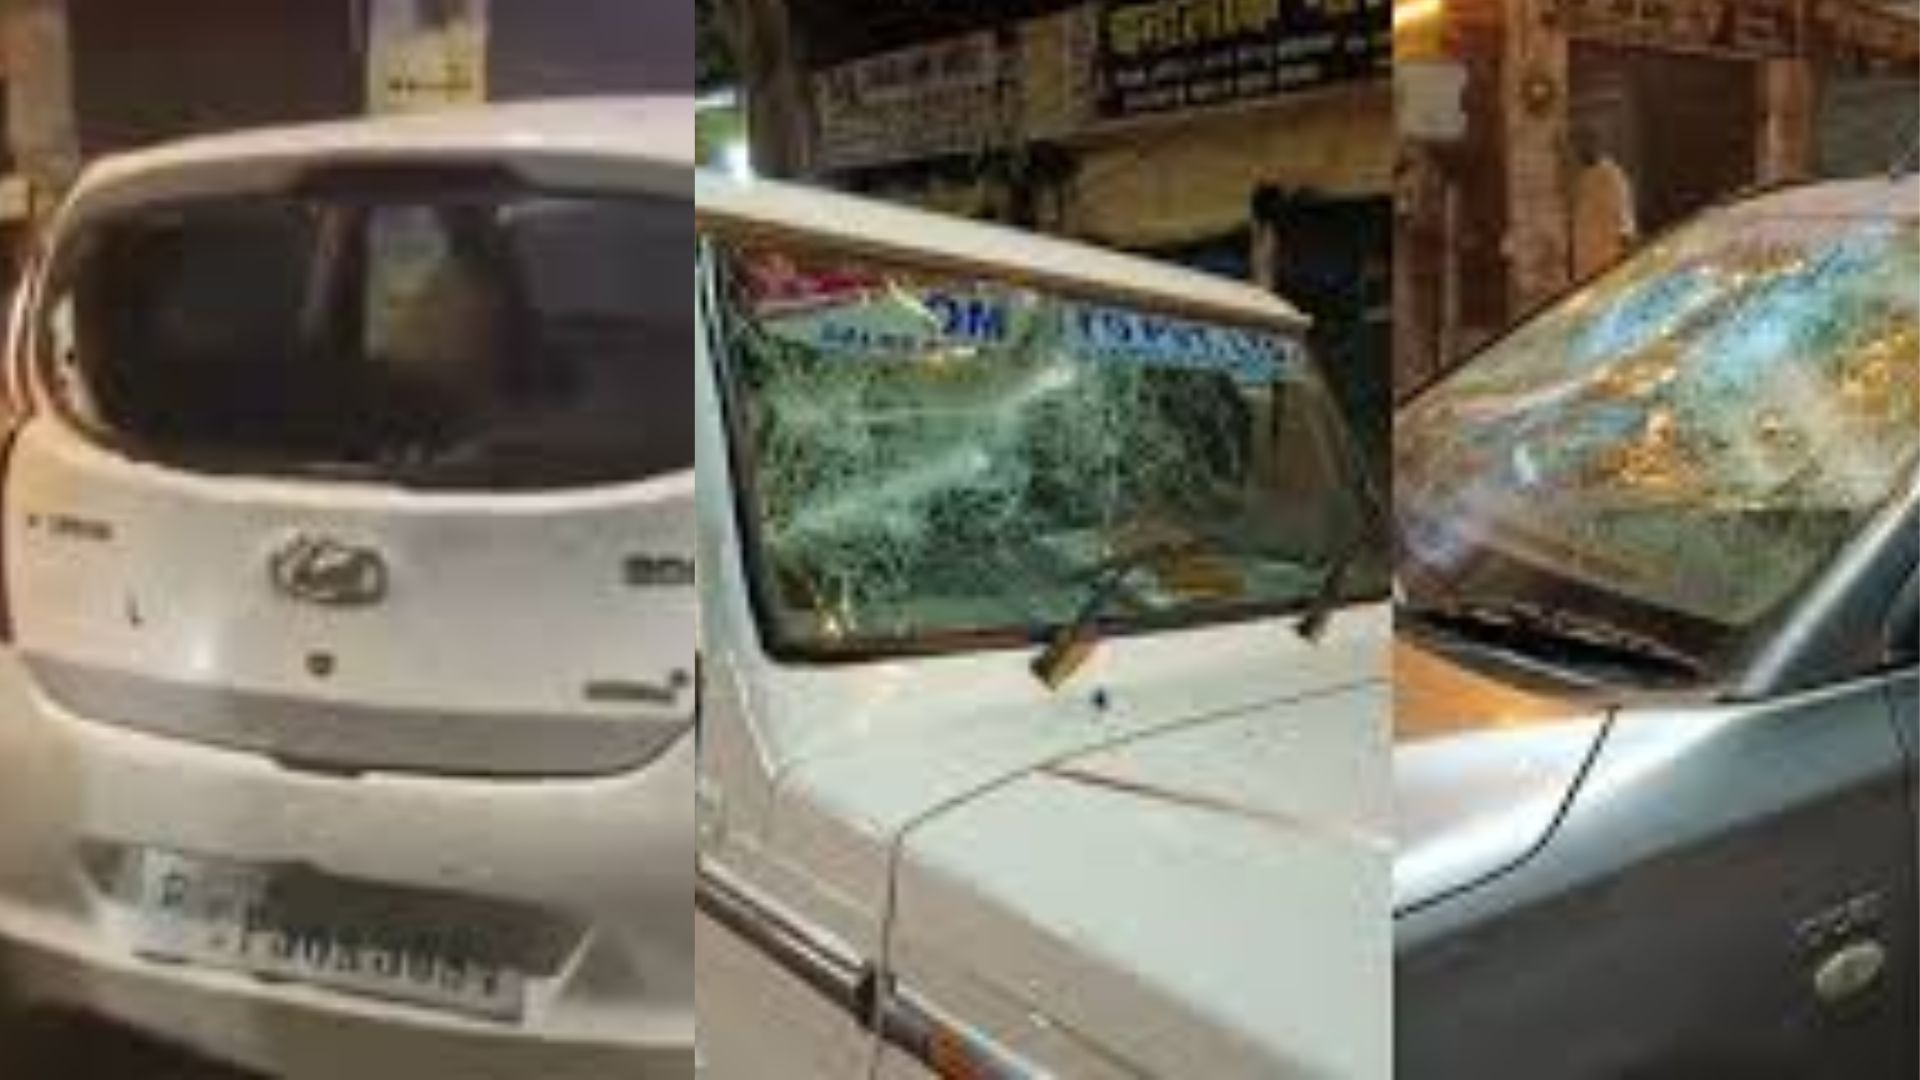 ‘BJP Workers Are Badly Scared in Amethi’ Says Congress Leaders On Vandalised Vehicles Outside Office